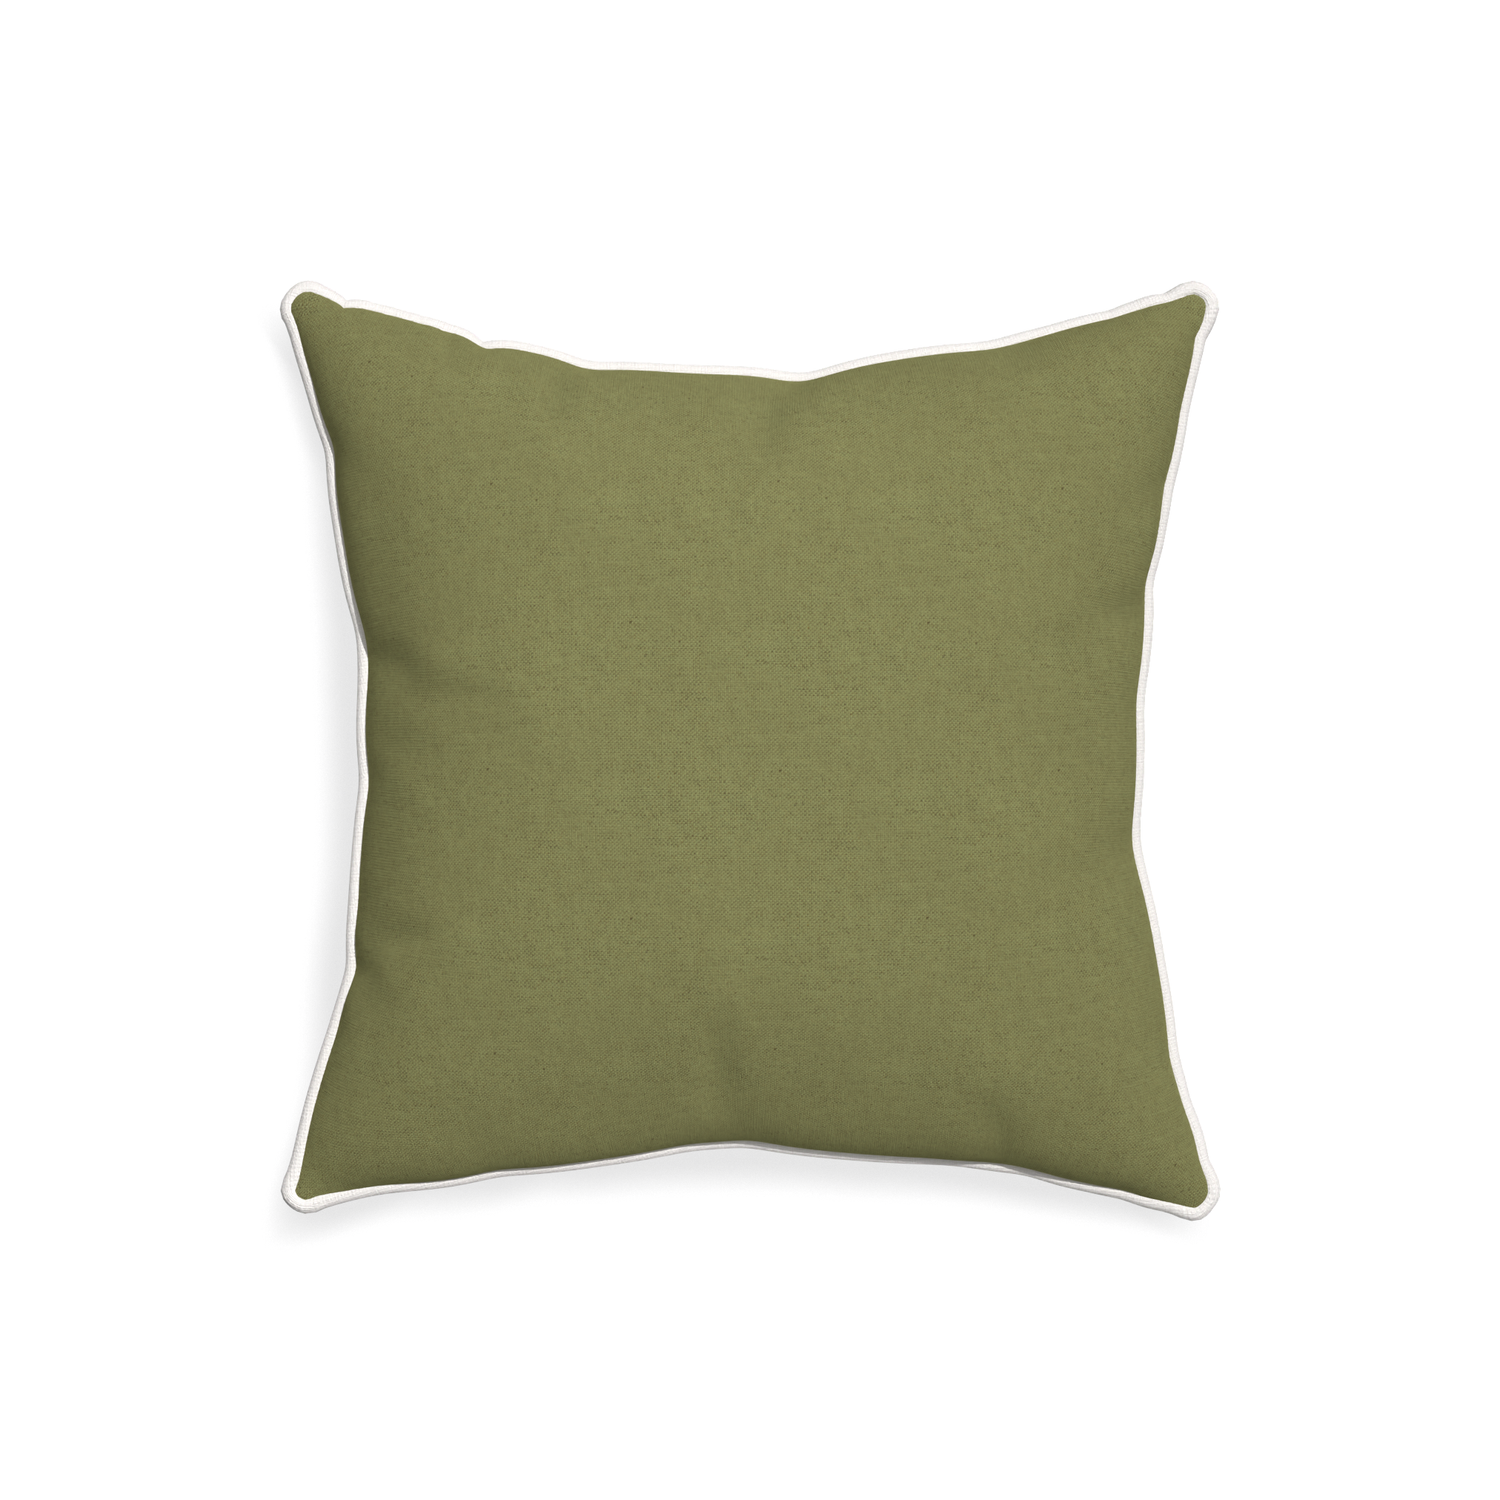 20-square moss custom moss greenpillow with snow piping on white background